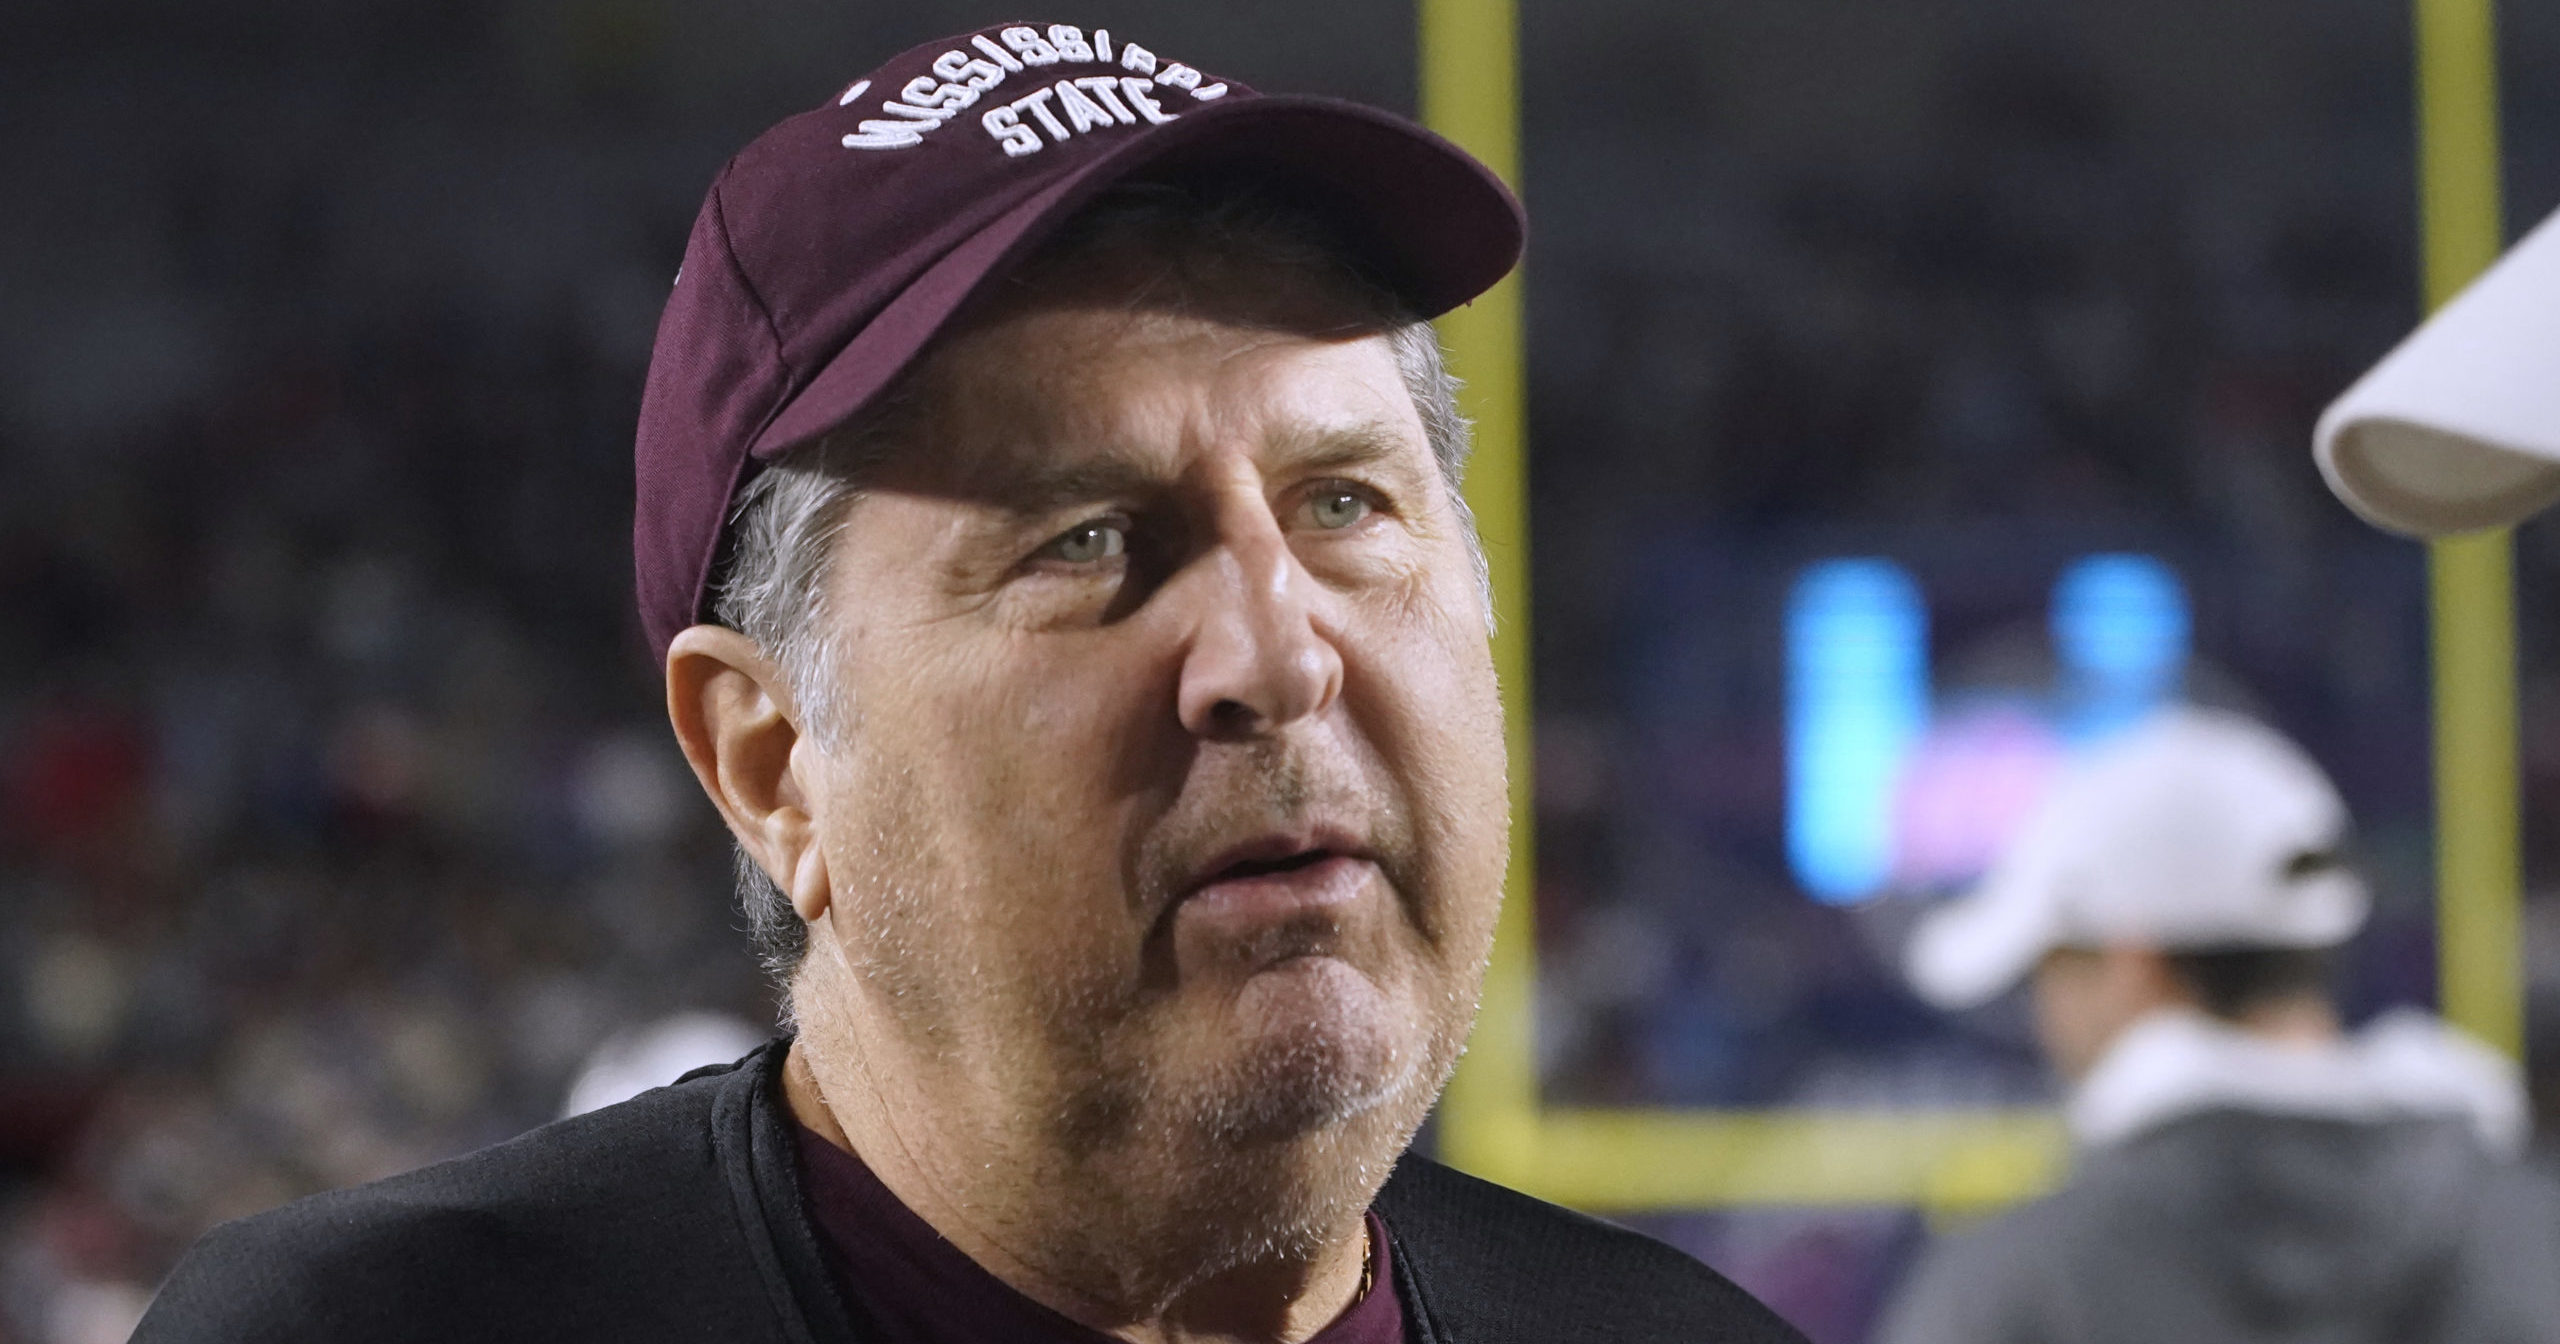 Mississippi State coach Mike Leach looks on before his team's game against Ole Miss in Oxford, Mississippi, on Nov. 24.